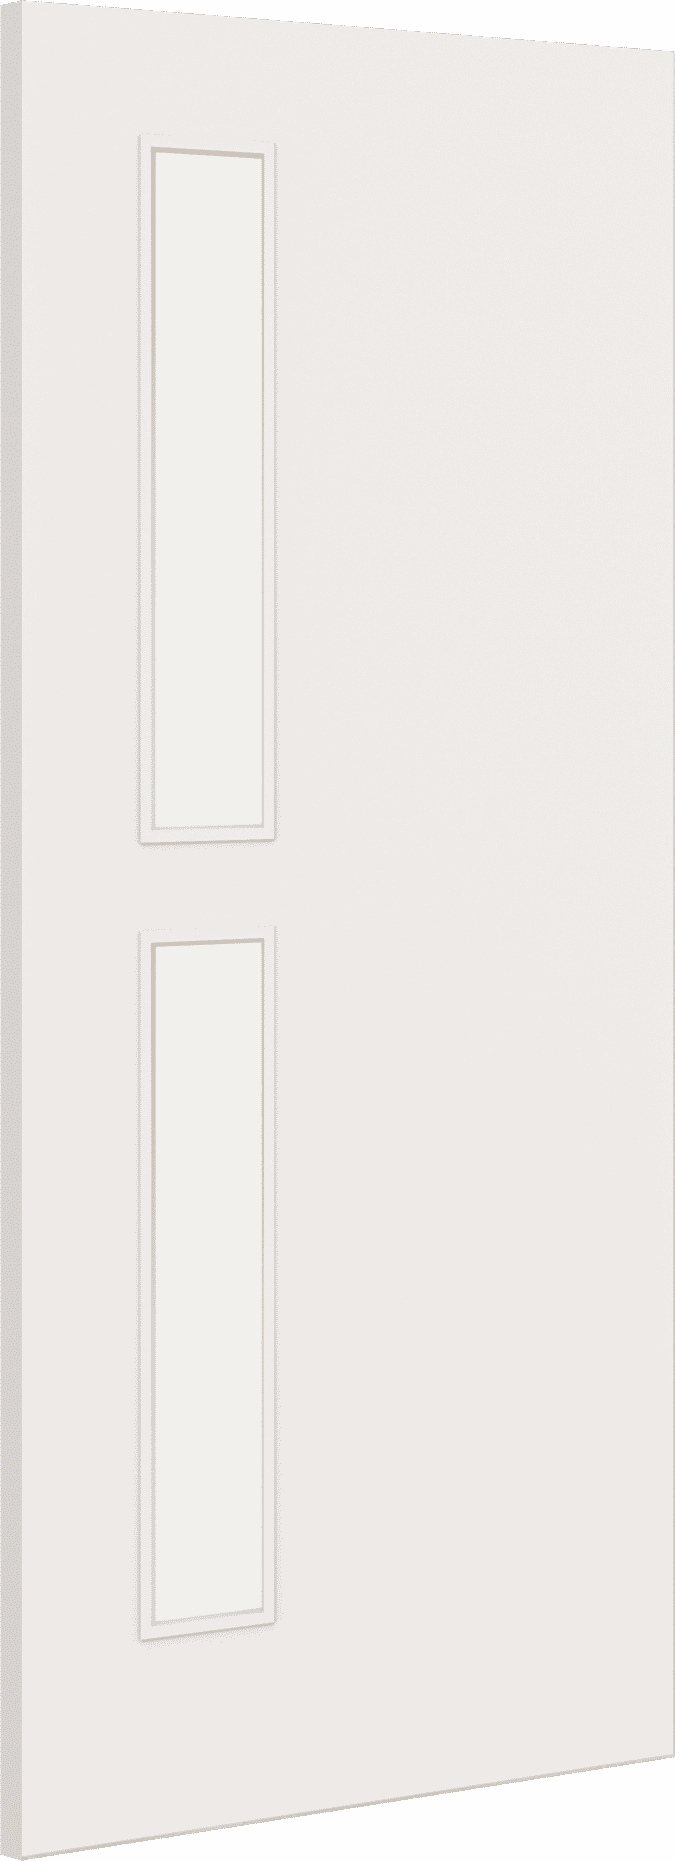 2040mm x 726mm x 44mm Architectural Paint Grade White 07 Frosted Glazed Fire Door Blank